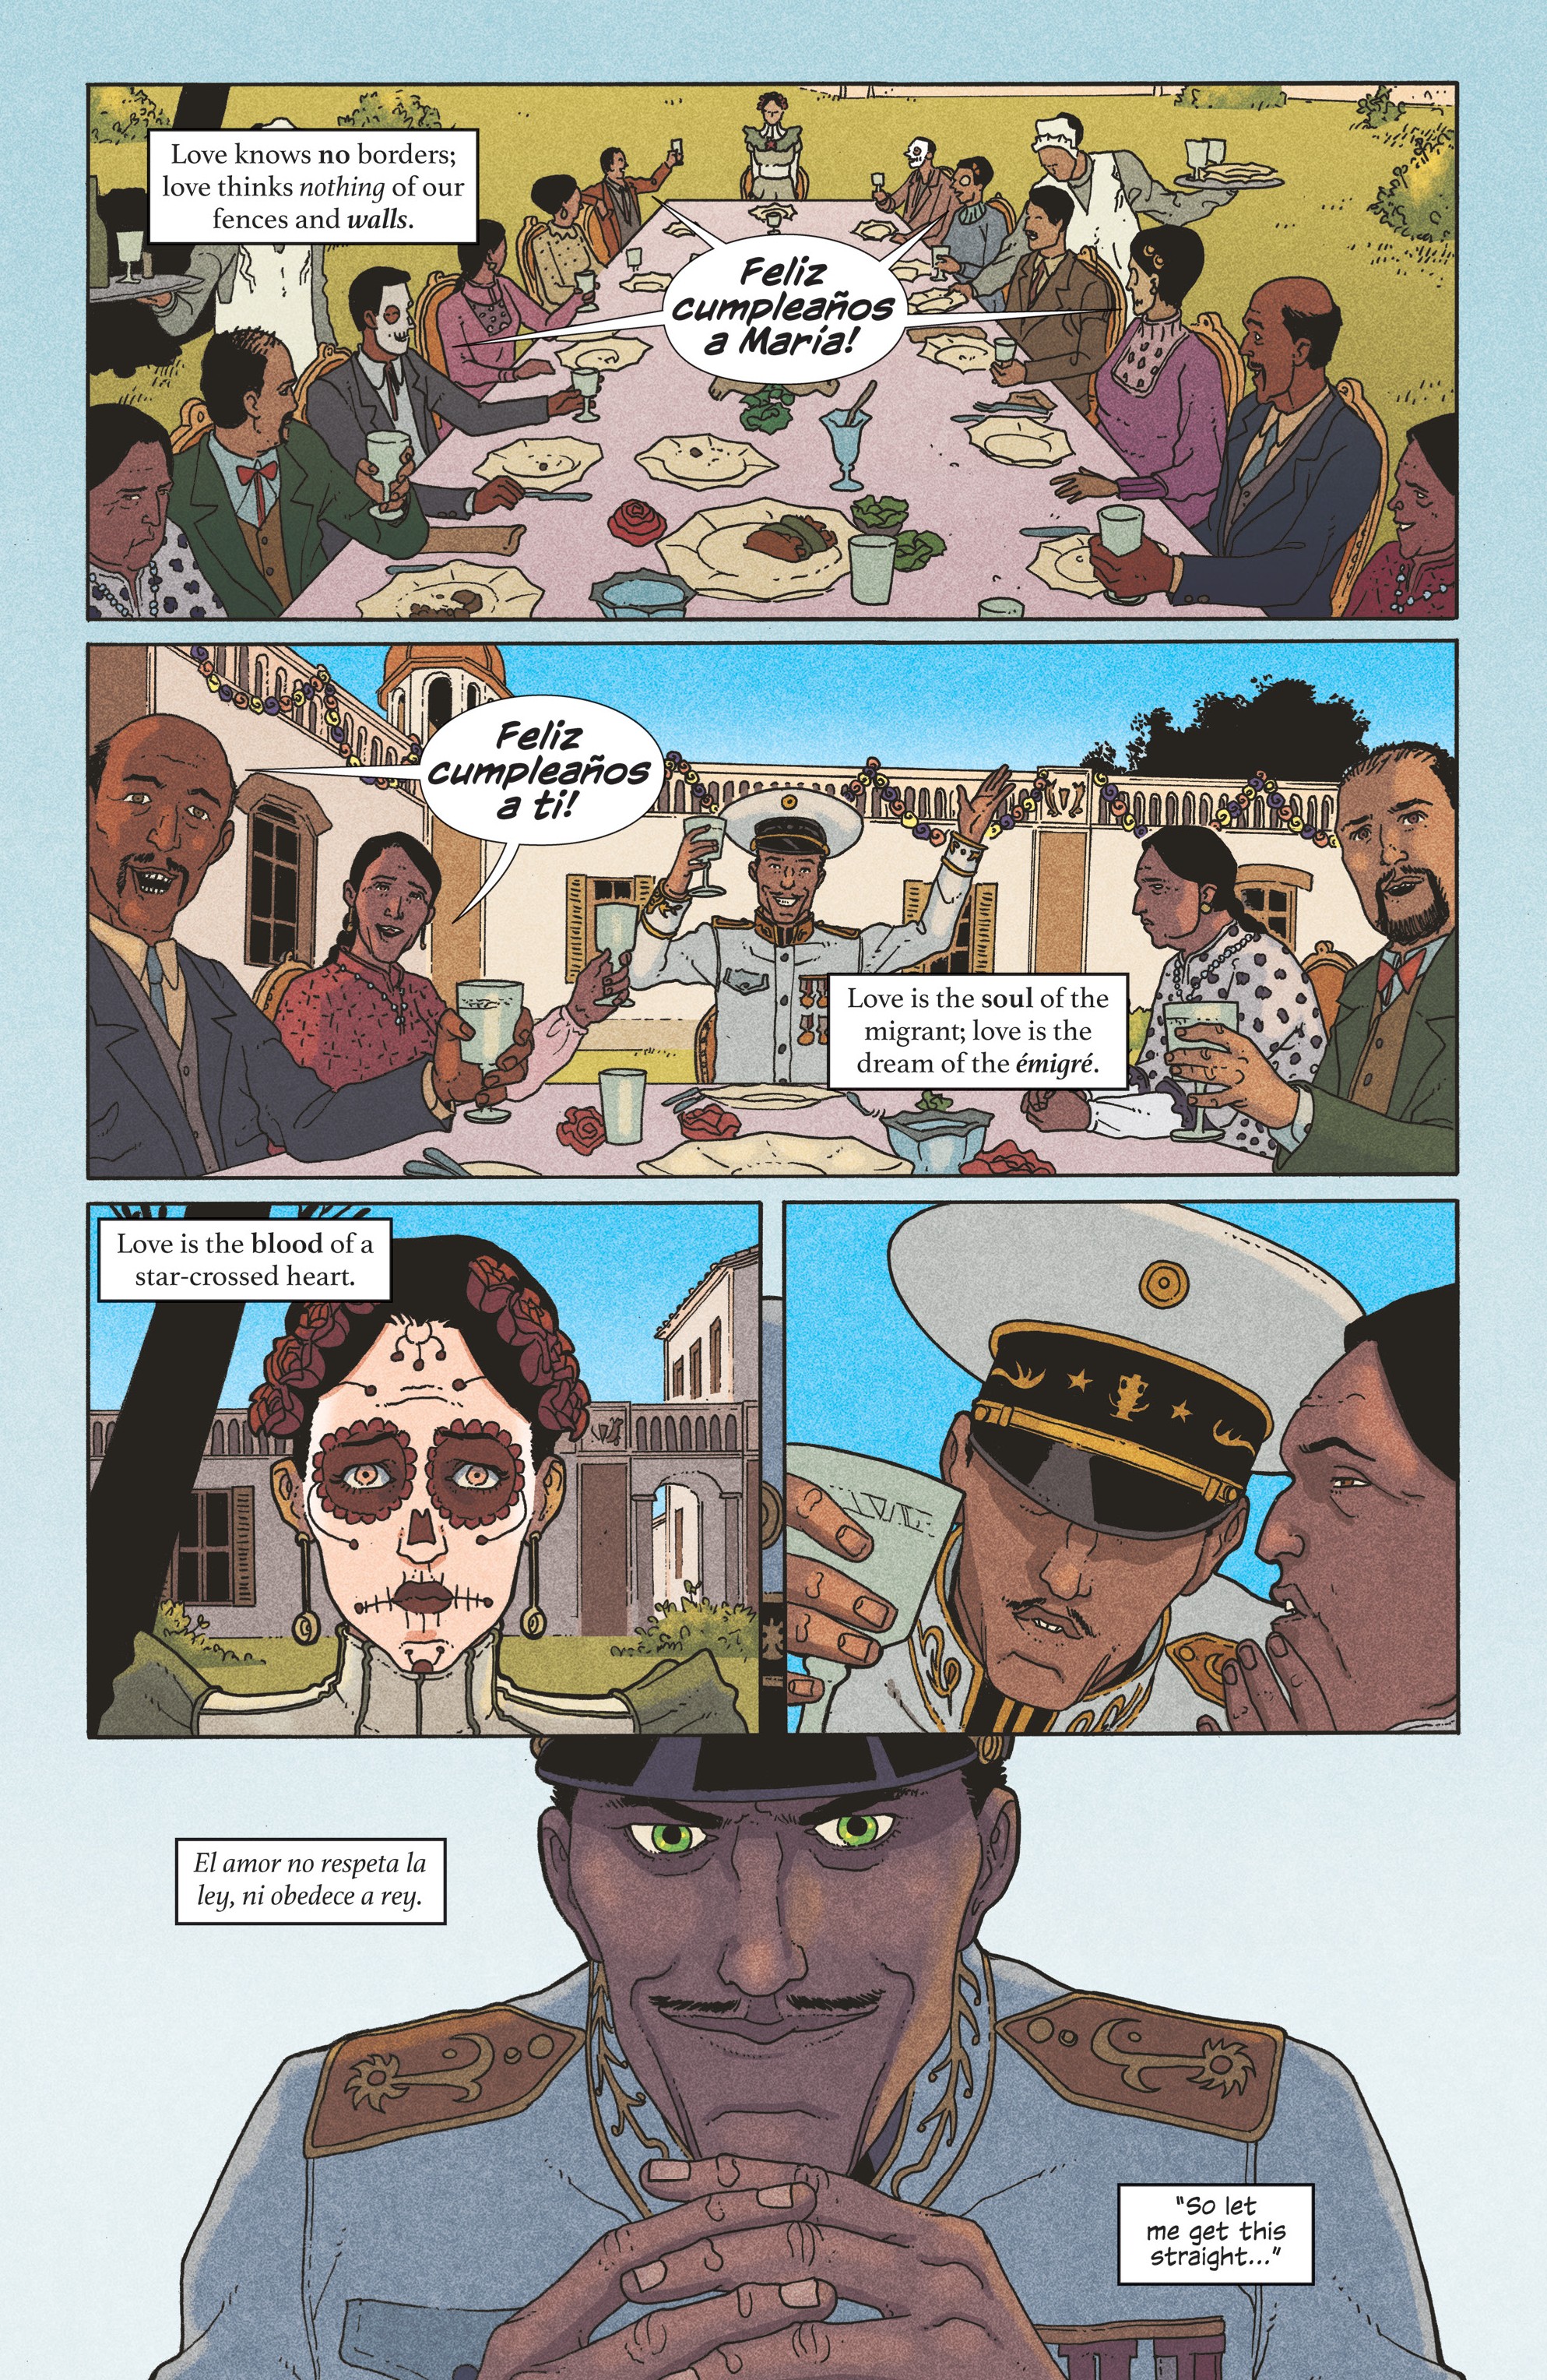 Ice Cream Man Issue 10 Read Ice Cream Man Issue 10 Comic Online In High Quality Read Full Comic Online For Free Read Comics Online In High Quality